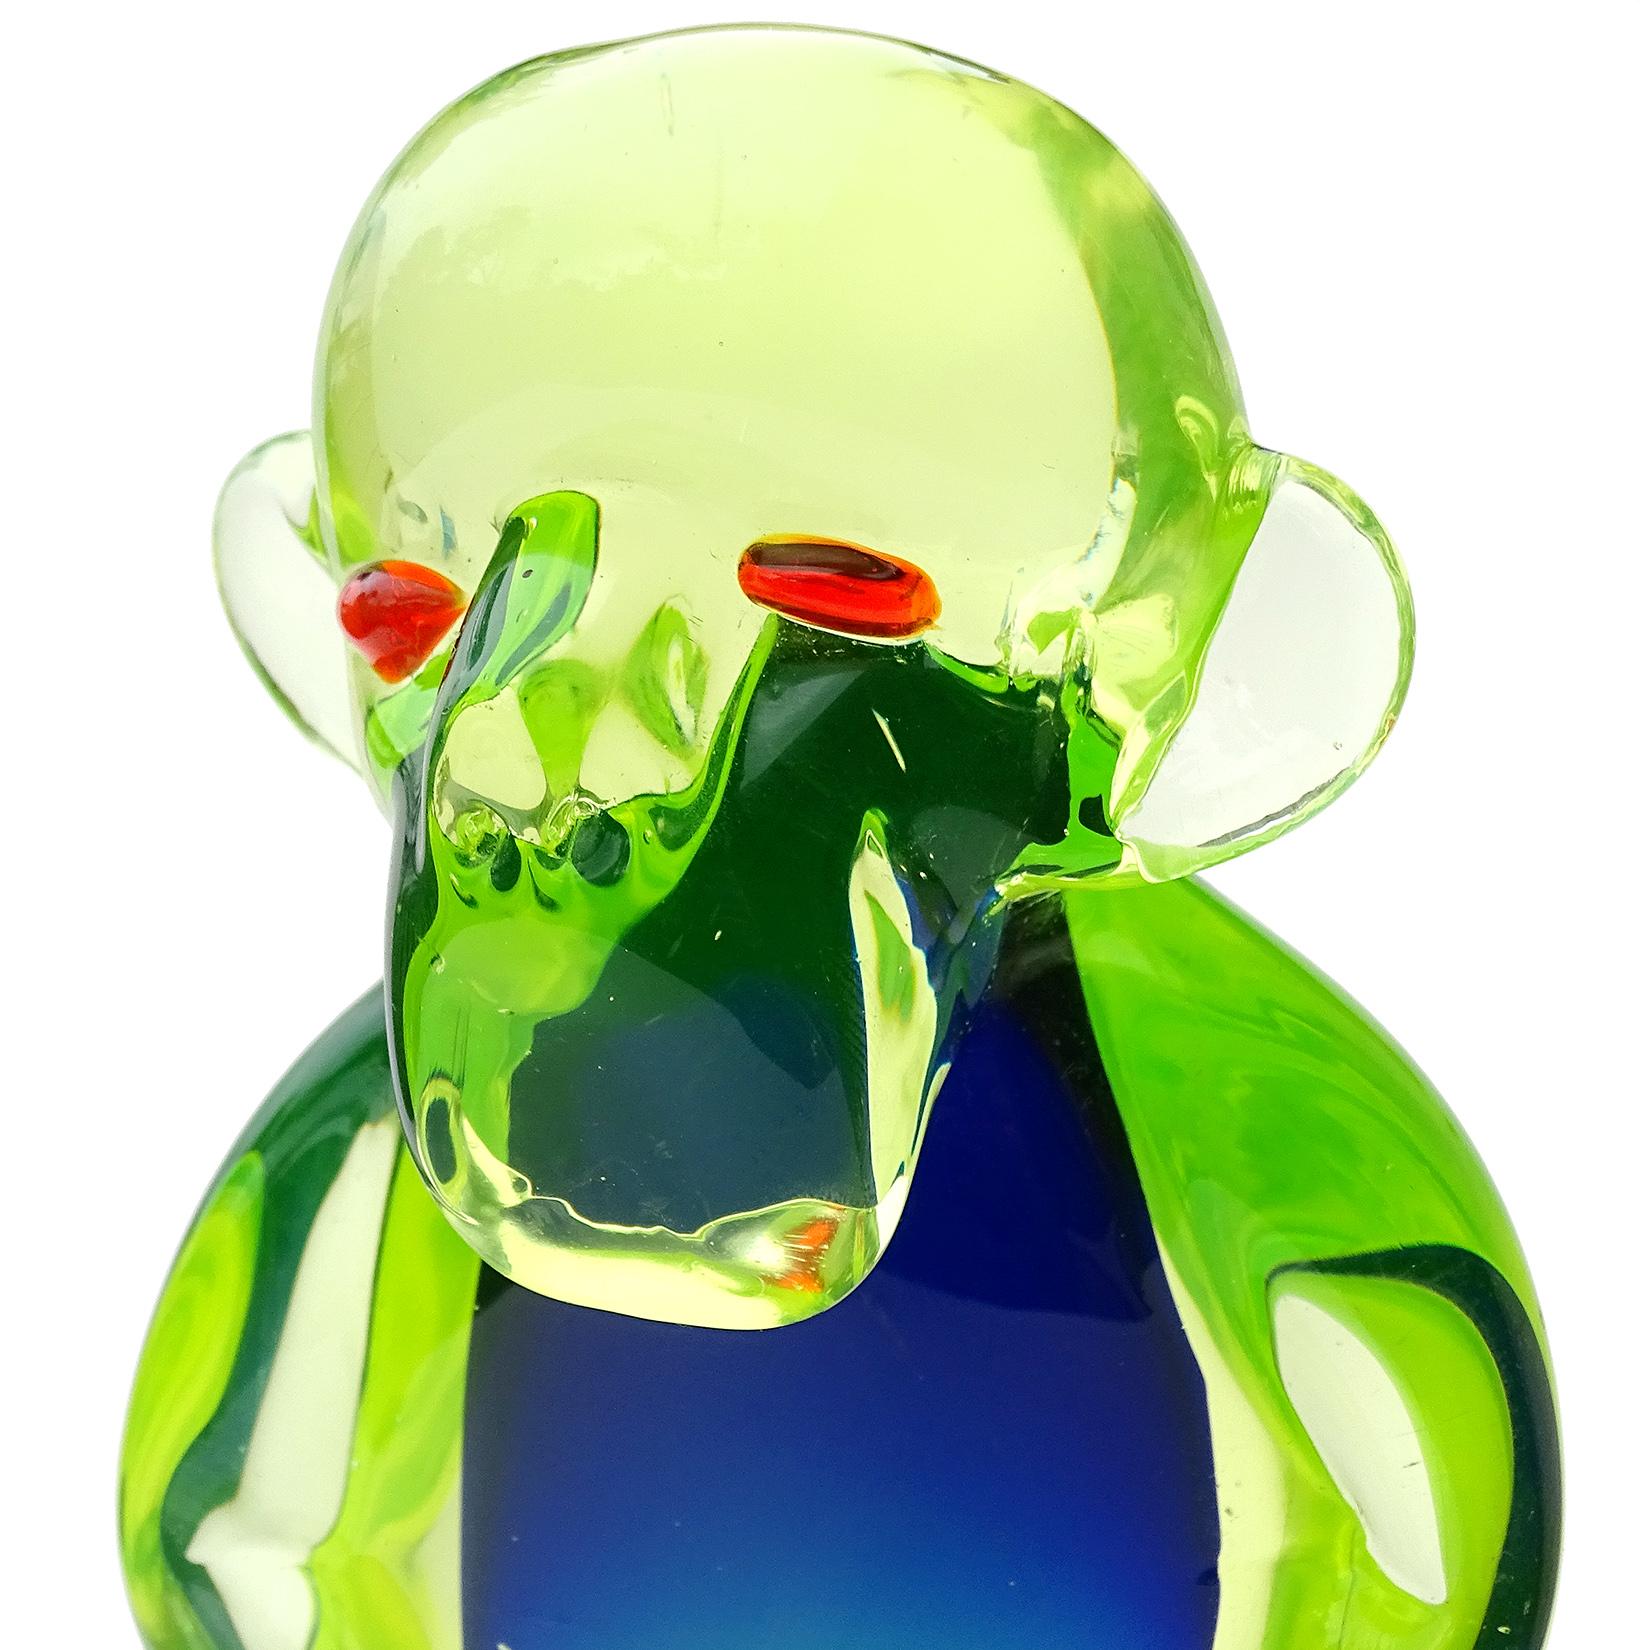 Rare and beautiful, vintage Murano hand blown Sommerso bright yellow green over blue Italian art glass monkey sculpture. Documented to the Salviati Company, with original label still attached underneath. The label reads 